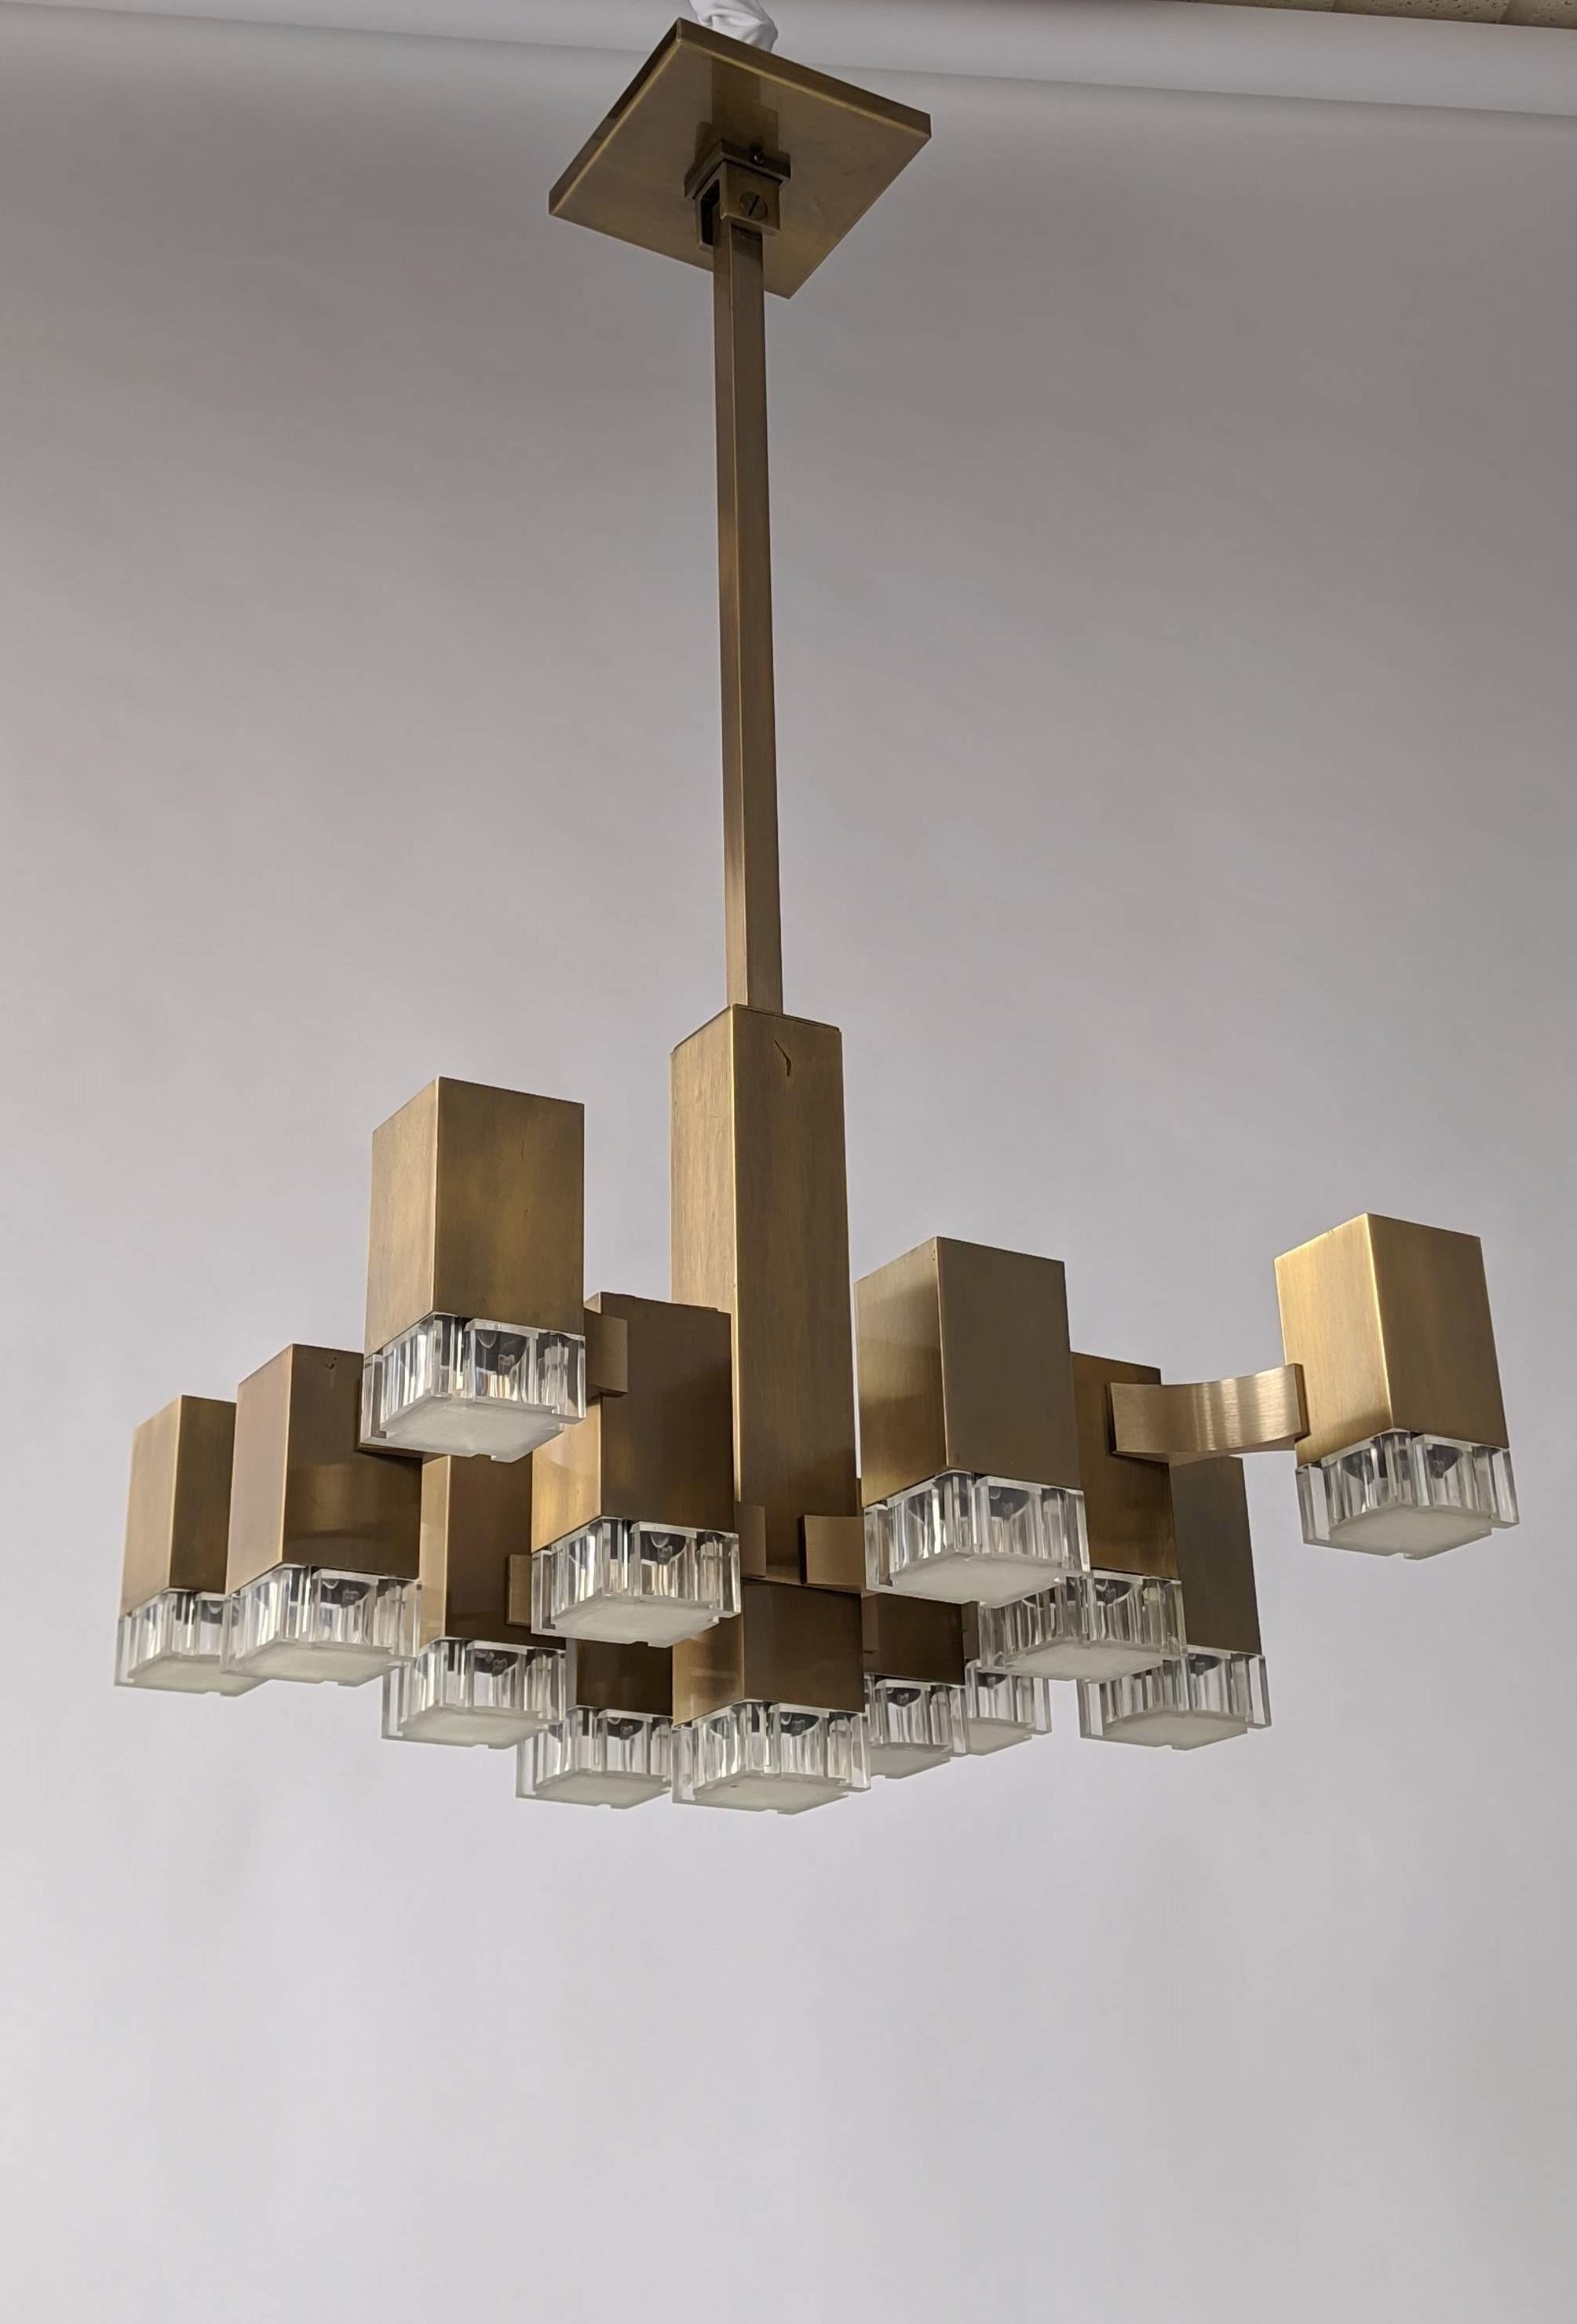 Iconic lighting art piece from Gaetano Sciolari

Prime quality material, solid conception and construction, fine assembly and craftsmanship.

Lacquered brass cubes.

A pull down and push up mechanism move the acrylic lens for easy bulbs